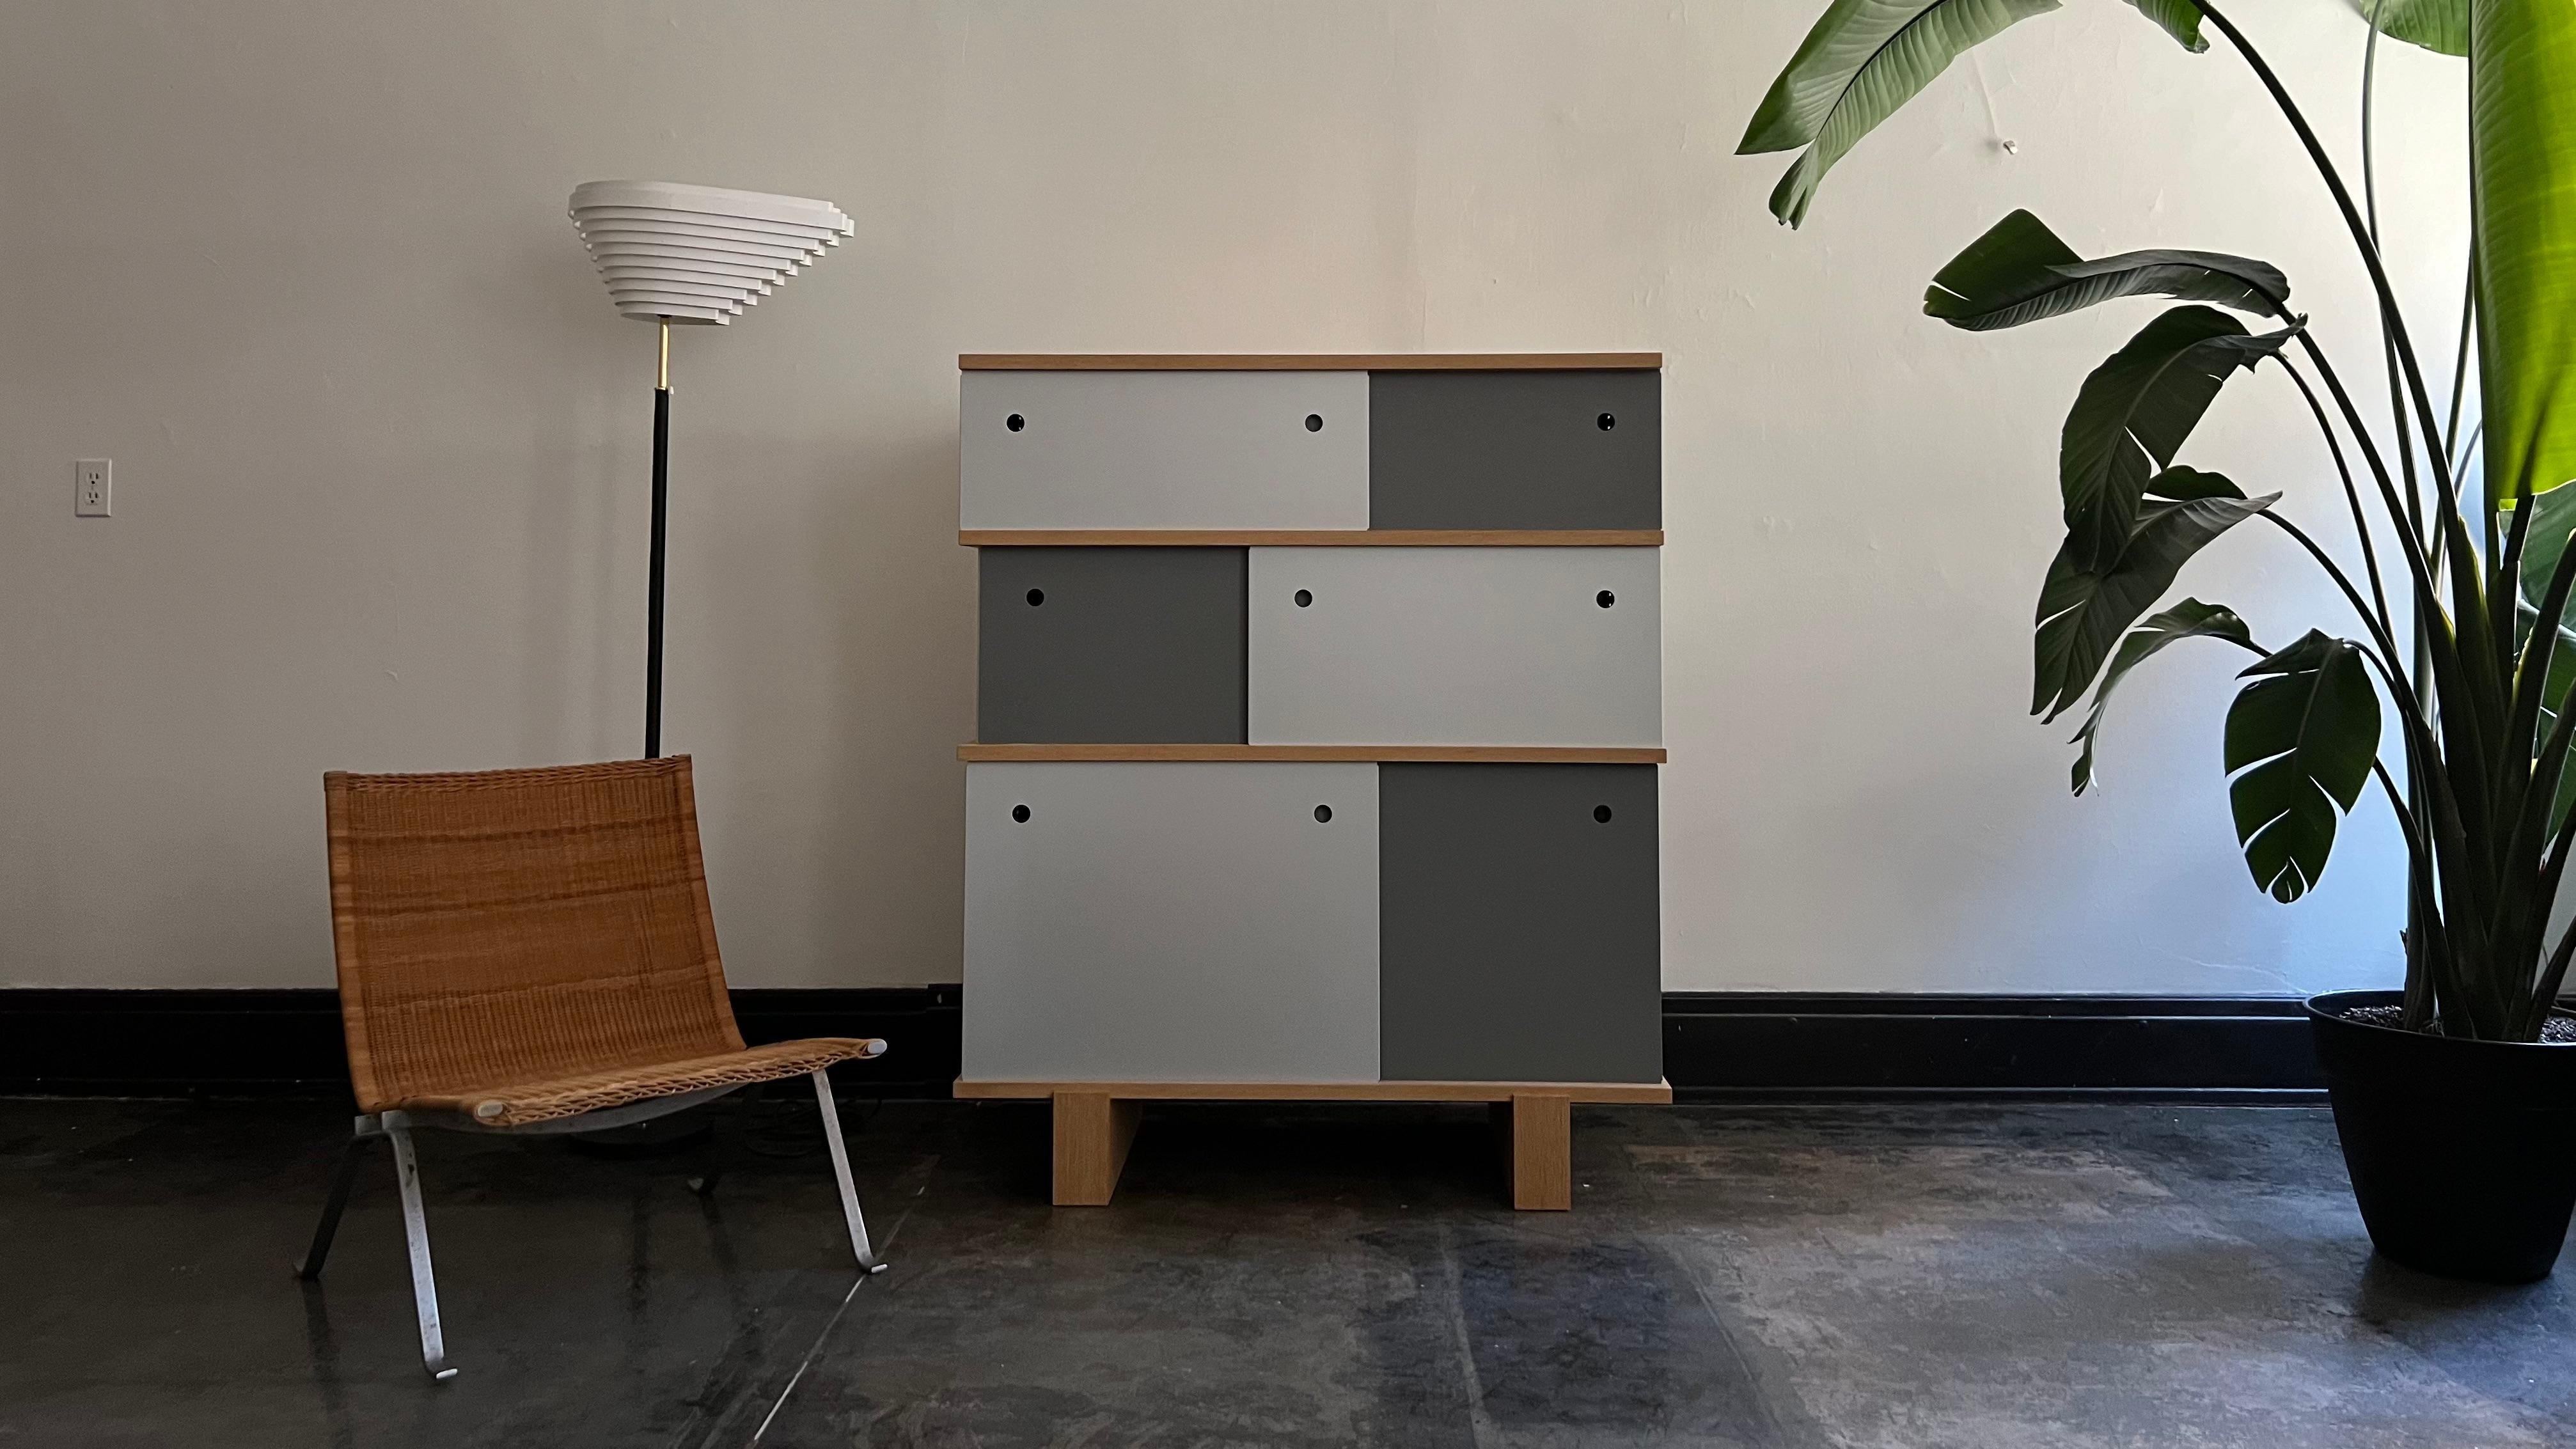 The Nuage BL implements Charlotte Perriand's system of modularity into a bookcase. Simple at its core, the Nuage BL consists of individual vertical metal components and oak horizontal components, connected by threaded rods at the corders of the